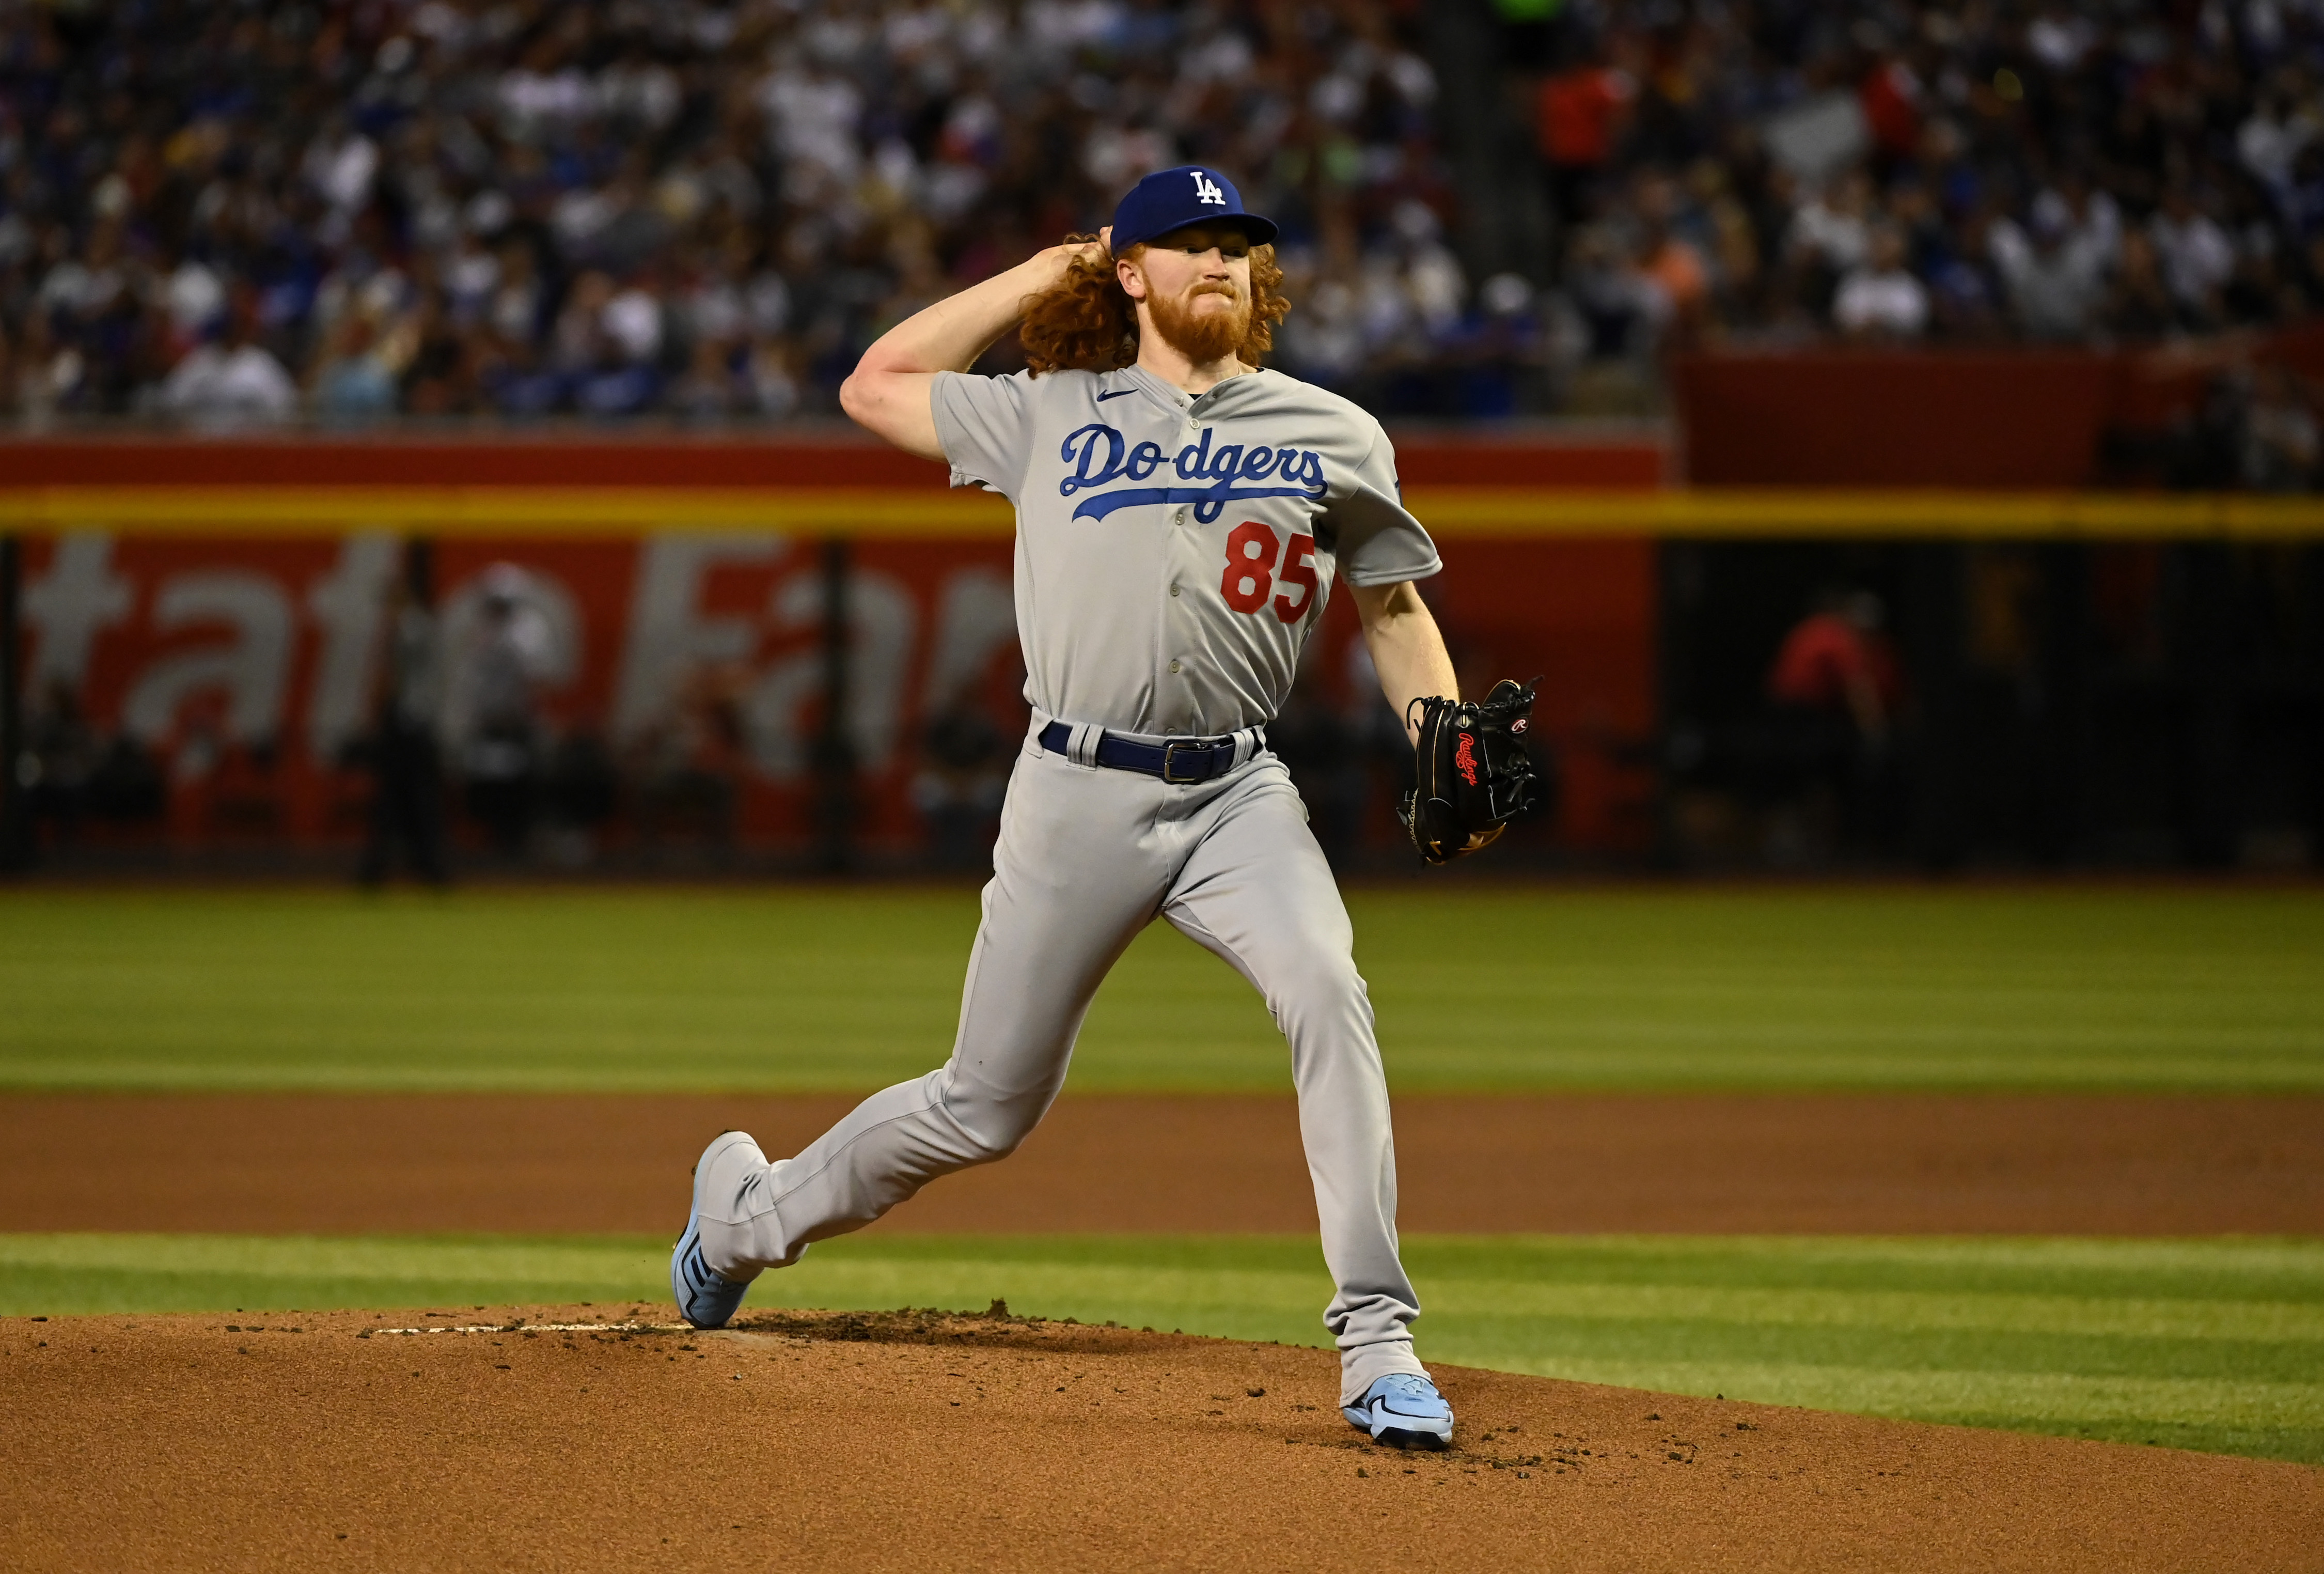 May throws 6 impressive innings, Dodgers beat D-backs 5-2